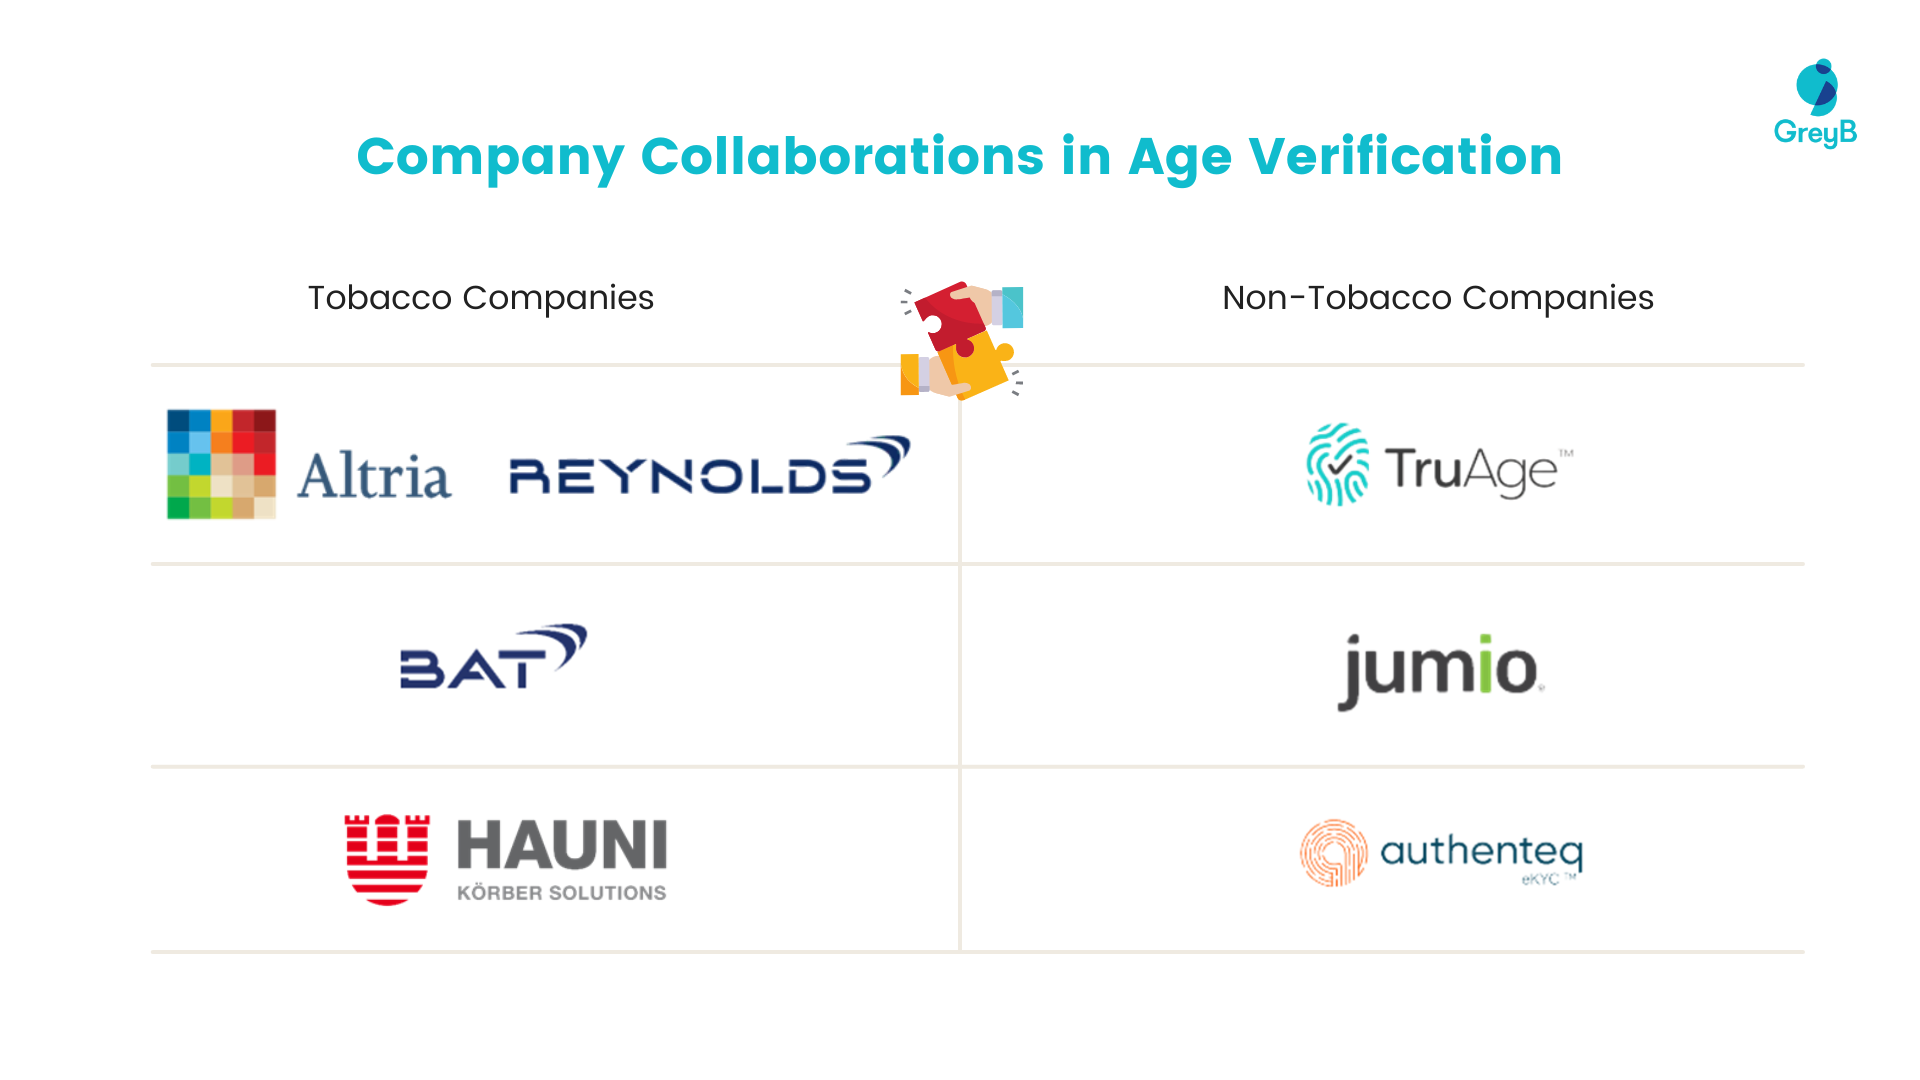 Company Collaborations in Age Verification